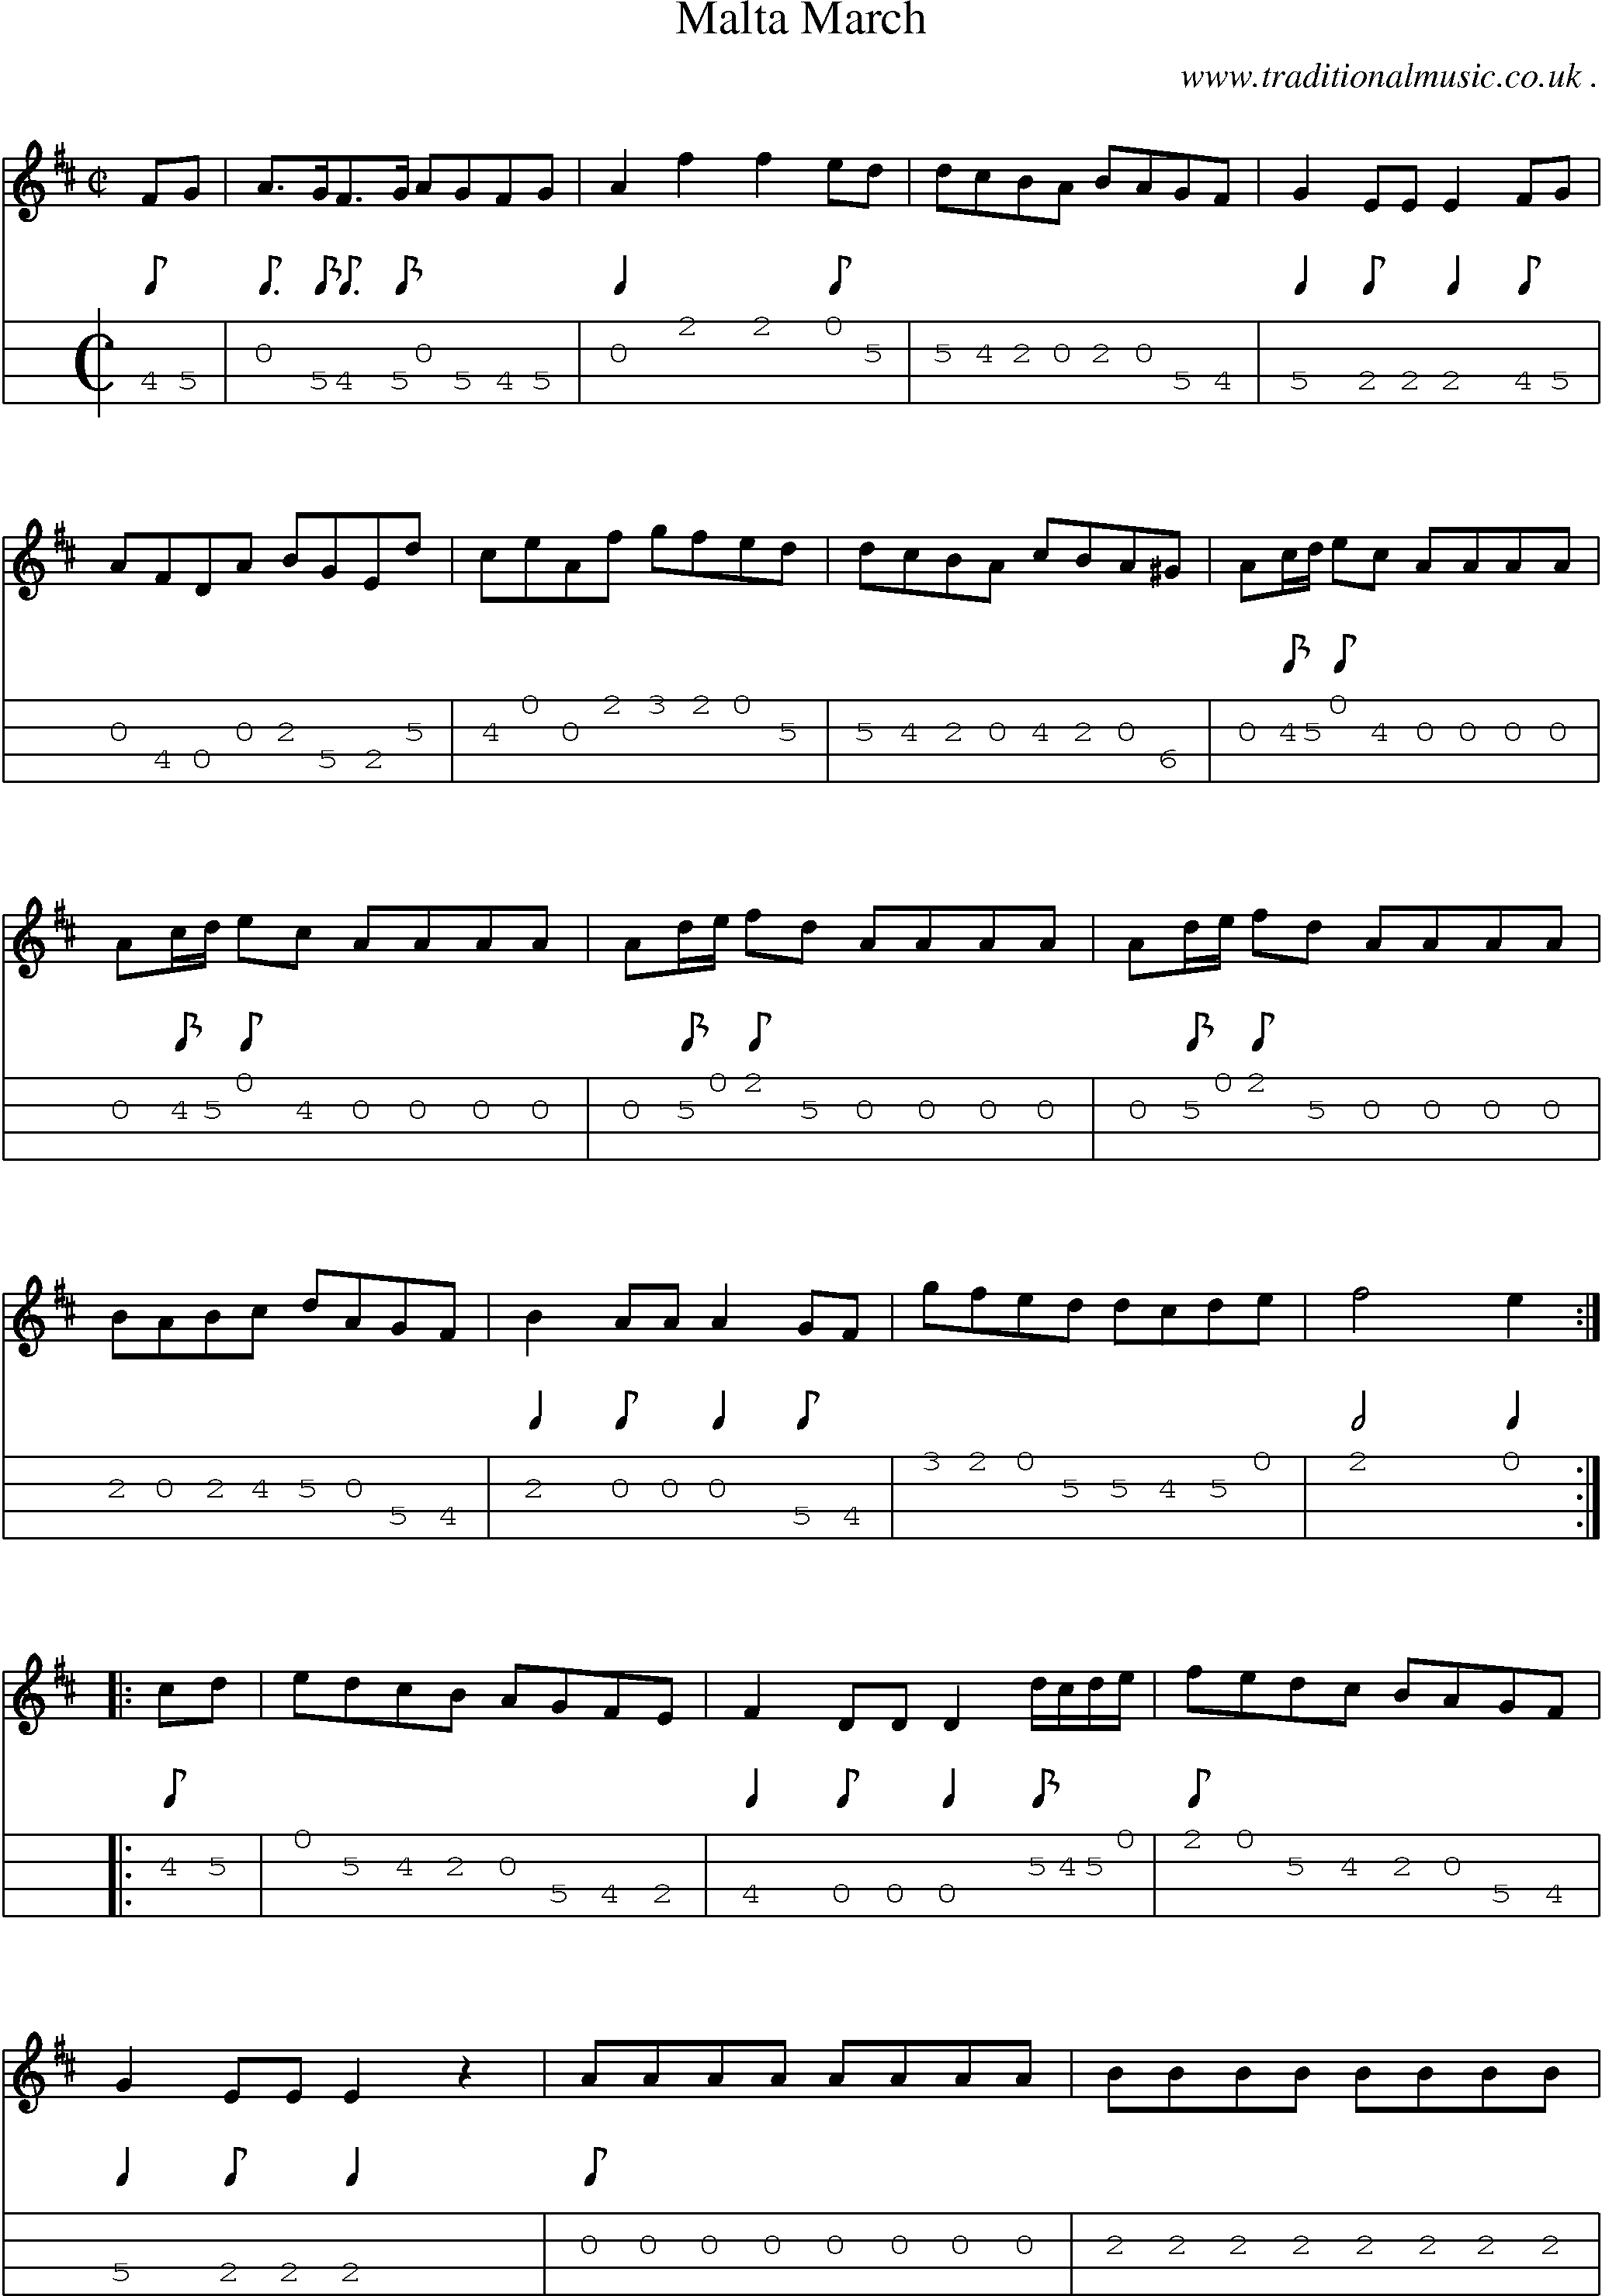 Sheet-Music and Mandolin Tabs for Malta March